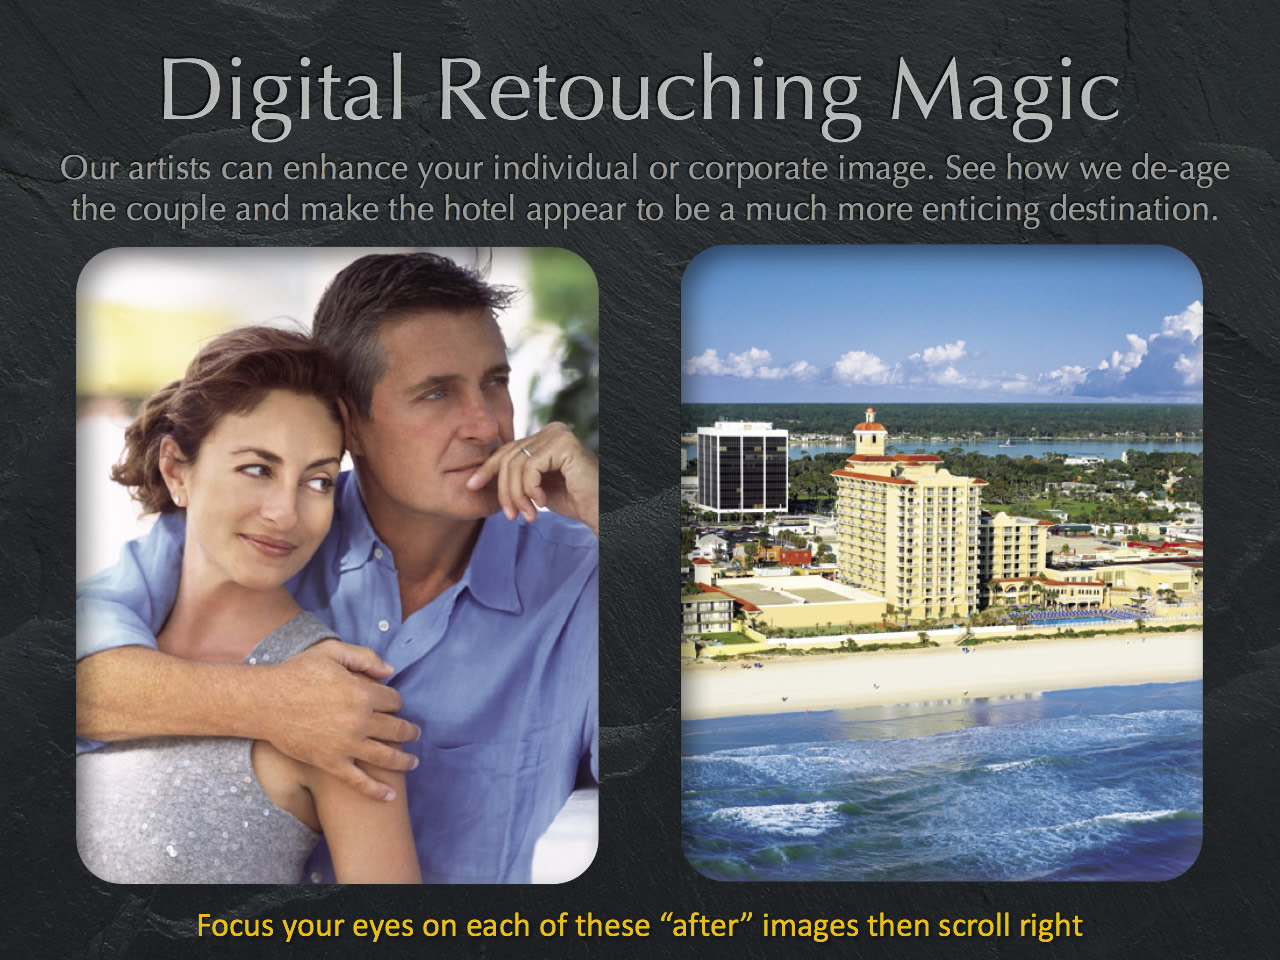 Digital retouch art can de-age people or alter the details of images to better present them